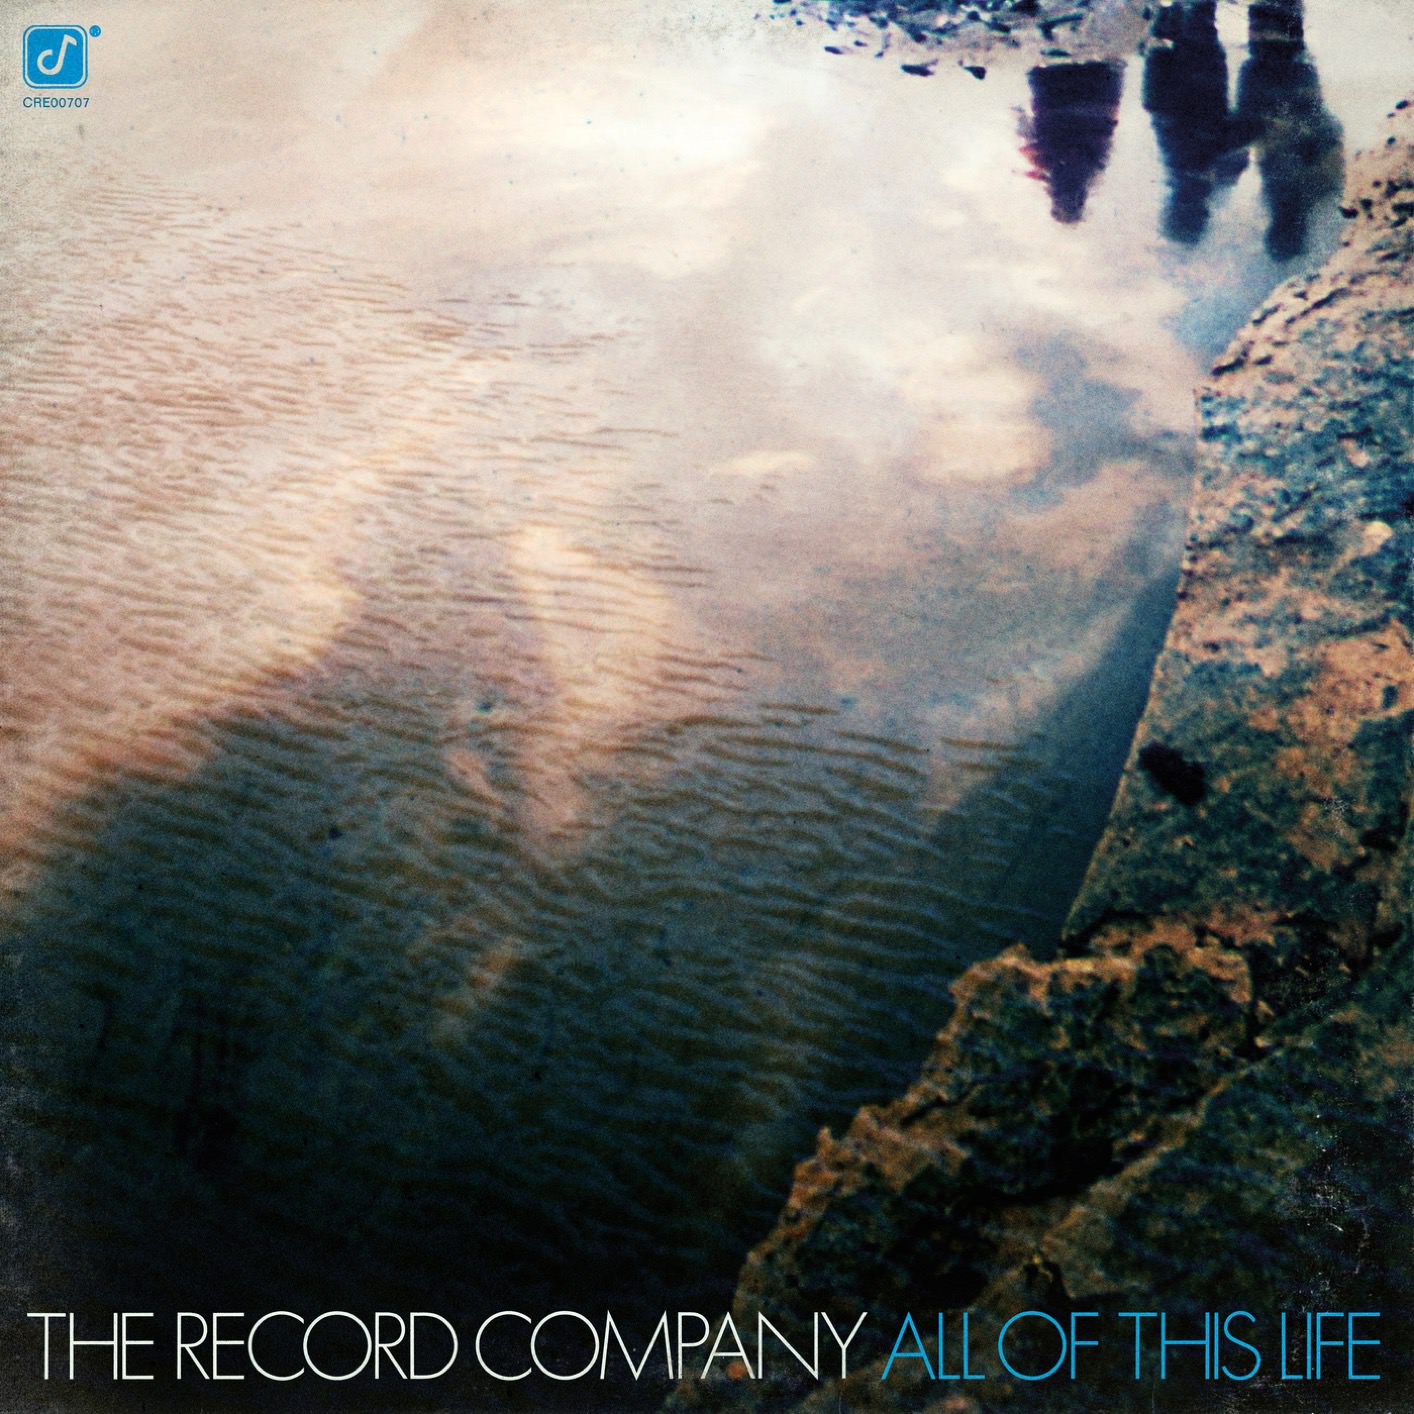 The Record Company - All of This Life (2018) [FLAC 24bit/48kHz]